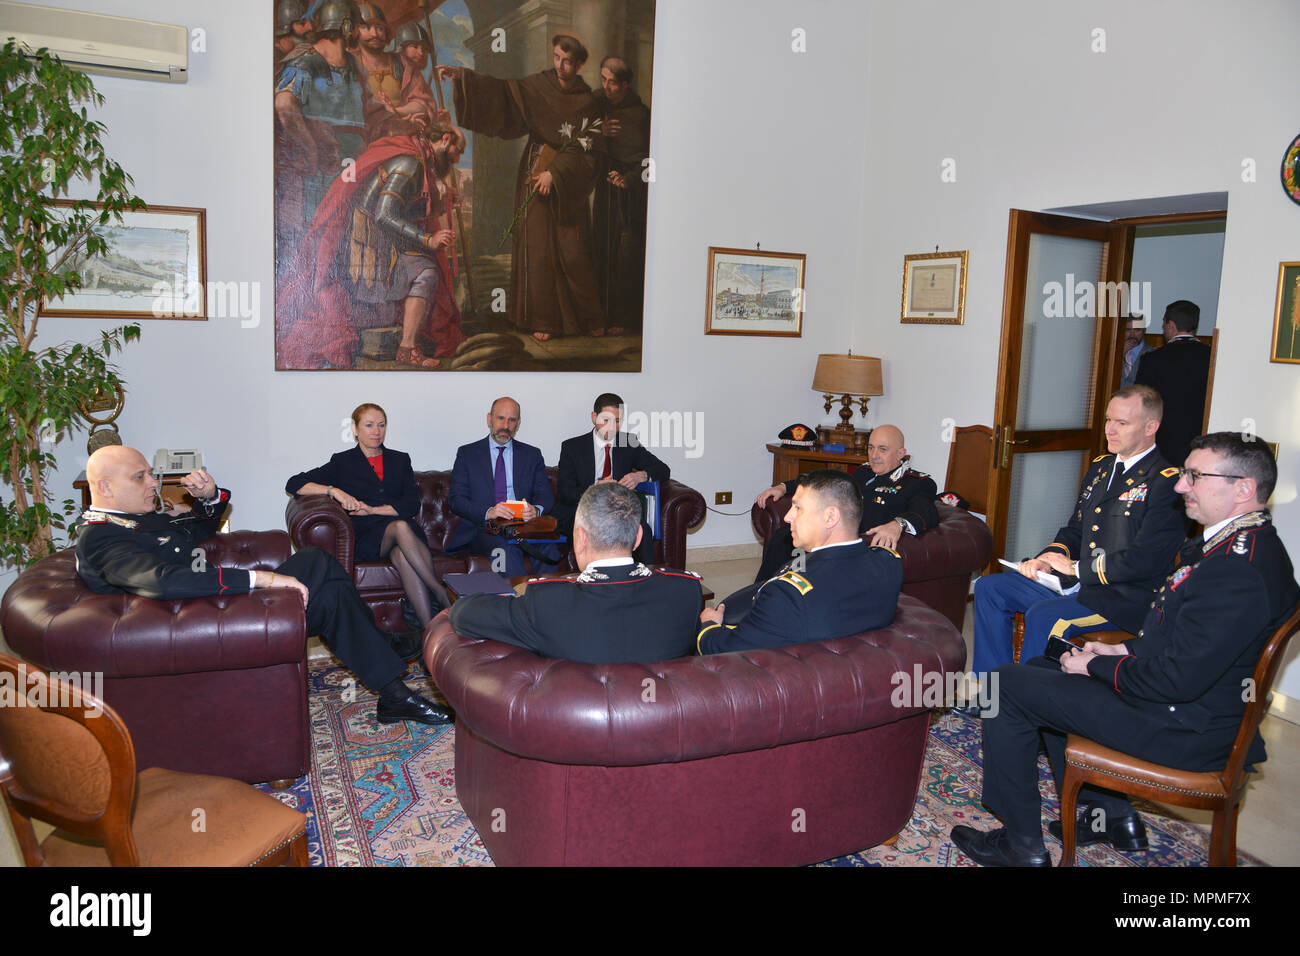 Ms. Kelly Degnan, Charge’ d’Affaires ad interim U.S. Embassy & Consulates Italy, meets Lt. Gen Vincenzo Coppola (left), Commanding General “Palidoro” Carabinieri Specialized, and CoESPU staff,  during visit at Center of Excellence for Stability Police Units (CoESPU) Vicenza, Italy, Mar. 30, 2017.(U.S. Army Photo by Visual Information Specialist Antonio Bedin/released) Stock Photo